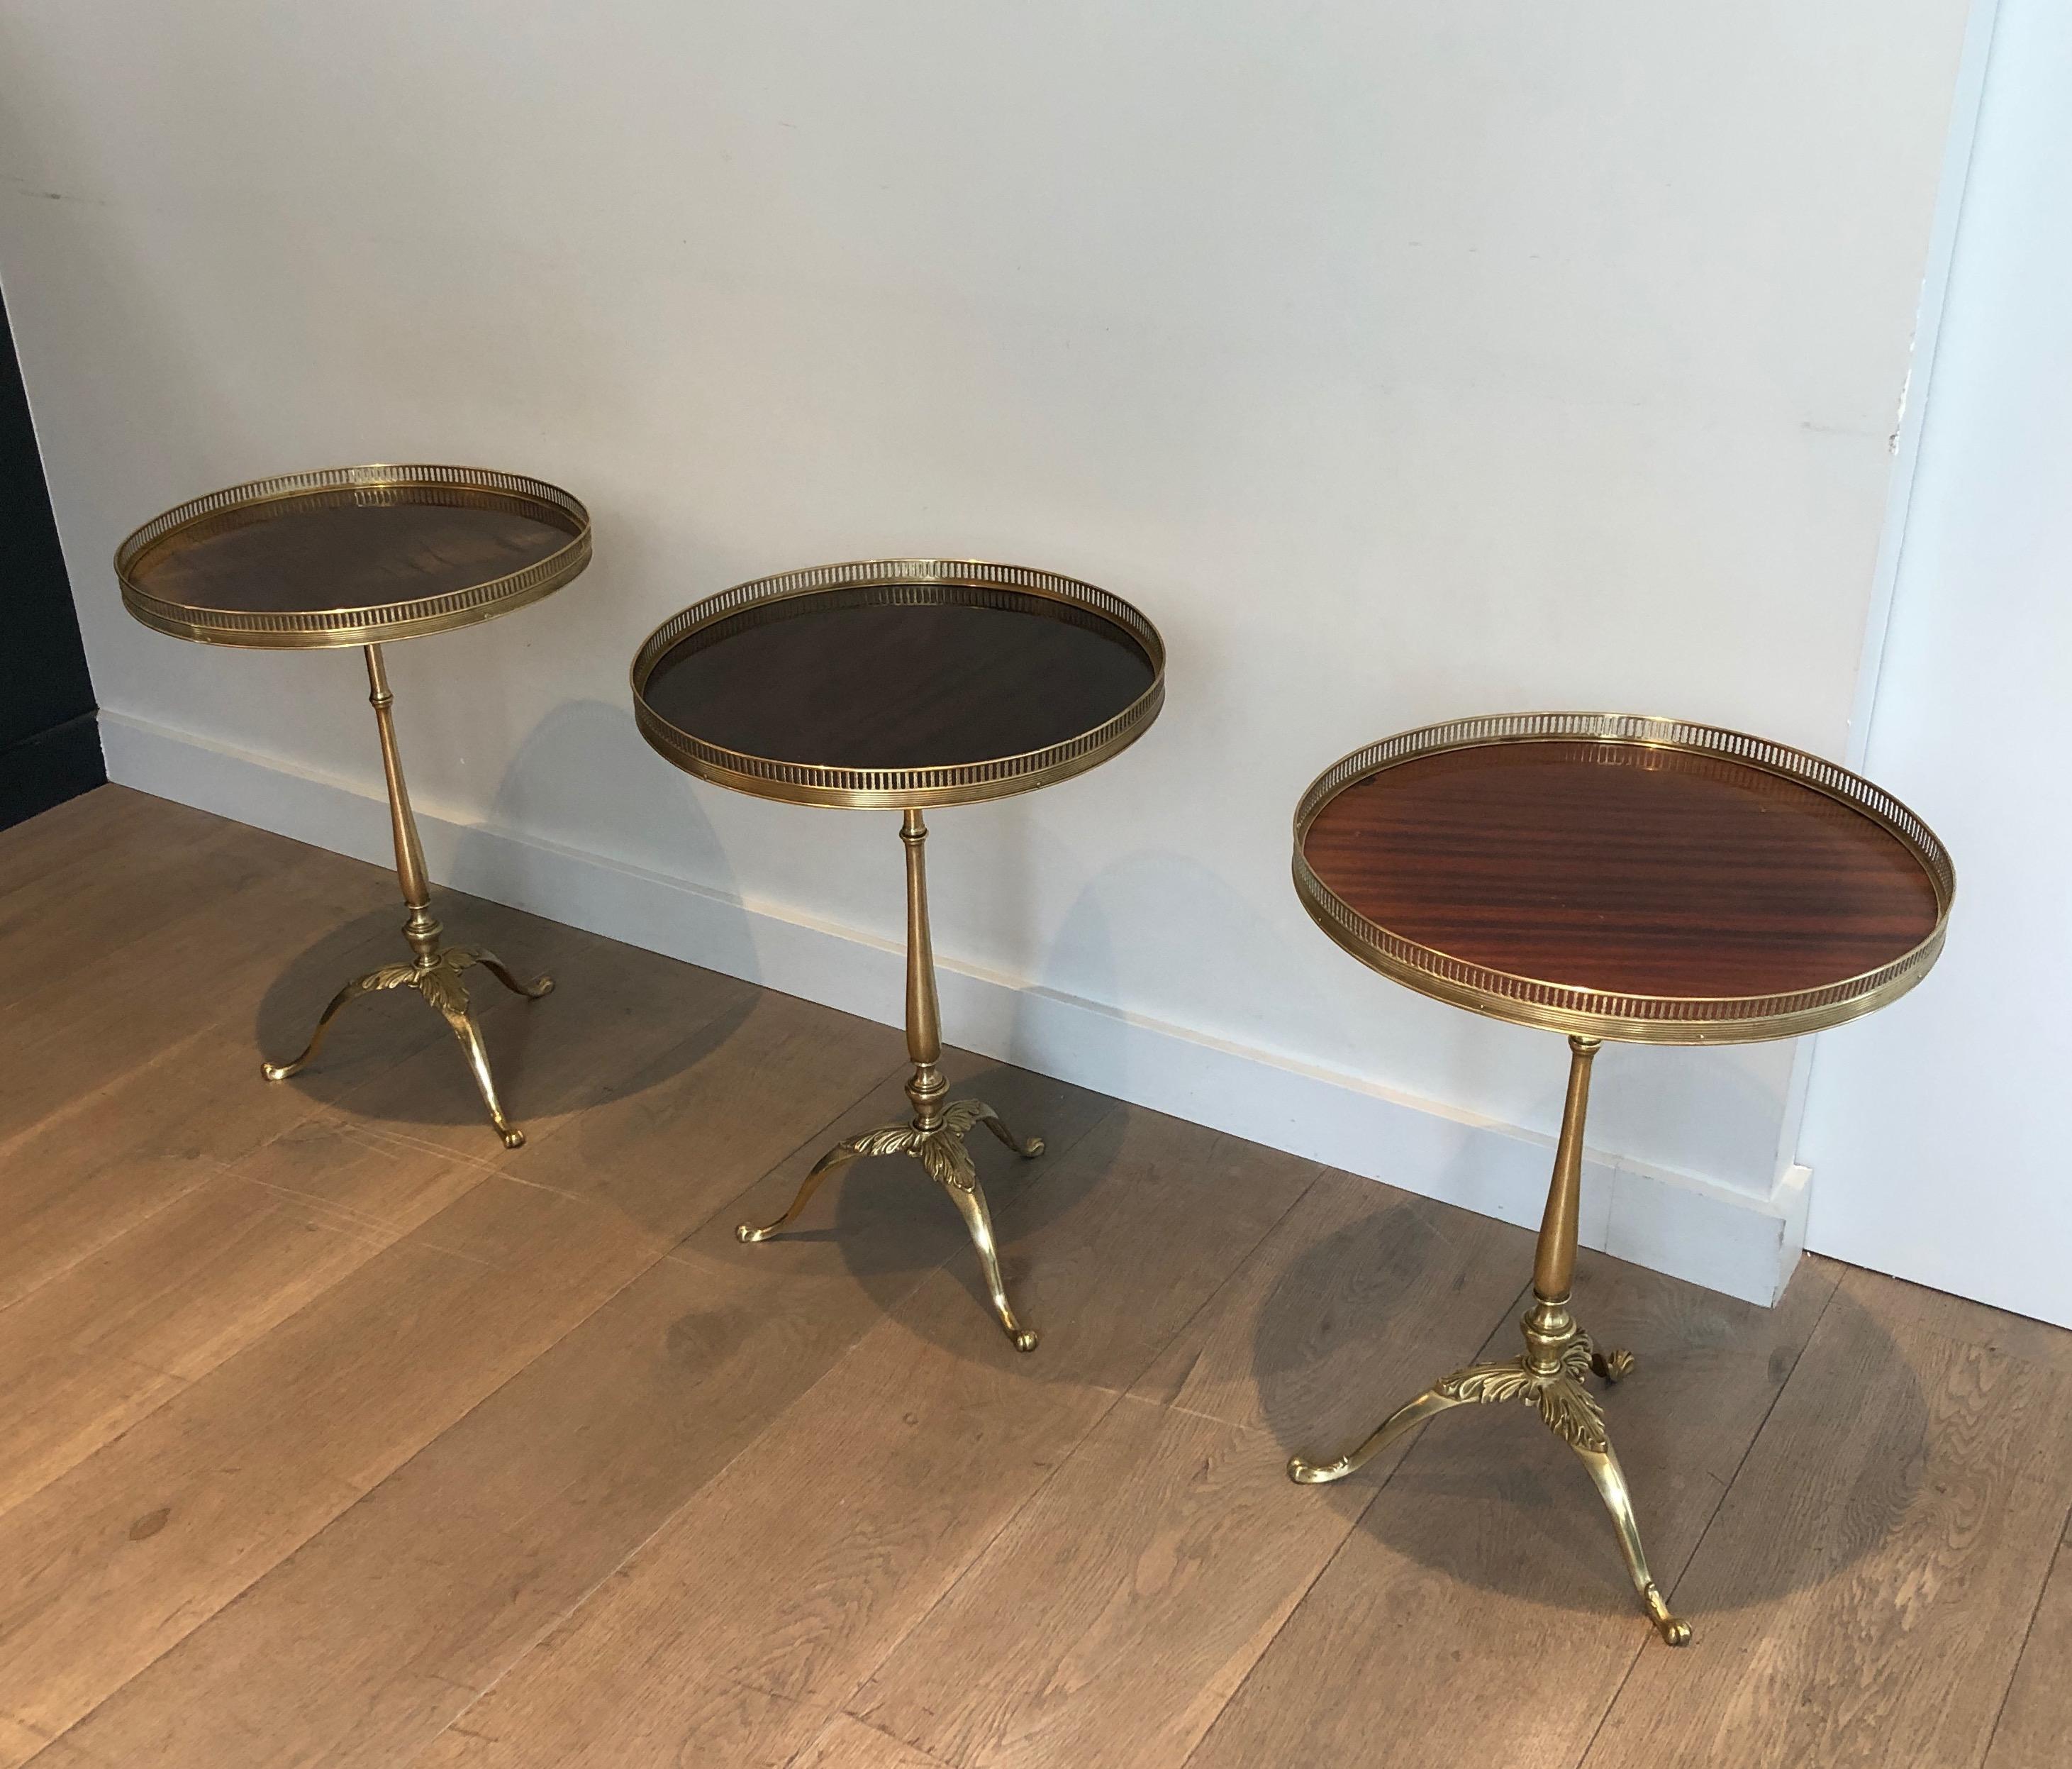 This set of 3 neoclassical style side table also called Martini tables are made of brass and mahogany. These end tables are attributed to famous French designer Maison Jansen, circa 1940
We have 3 of these tables.